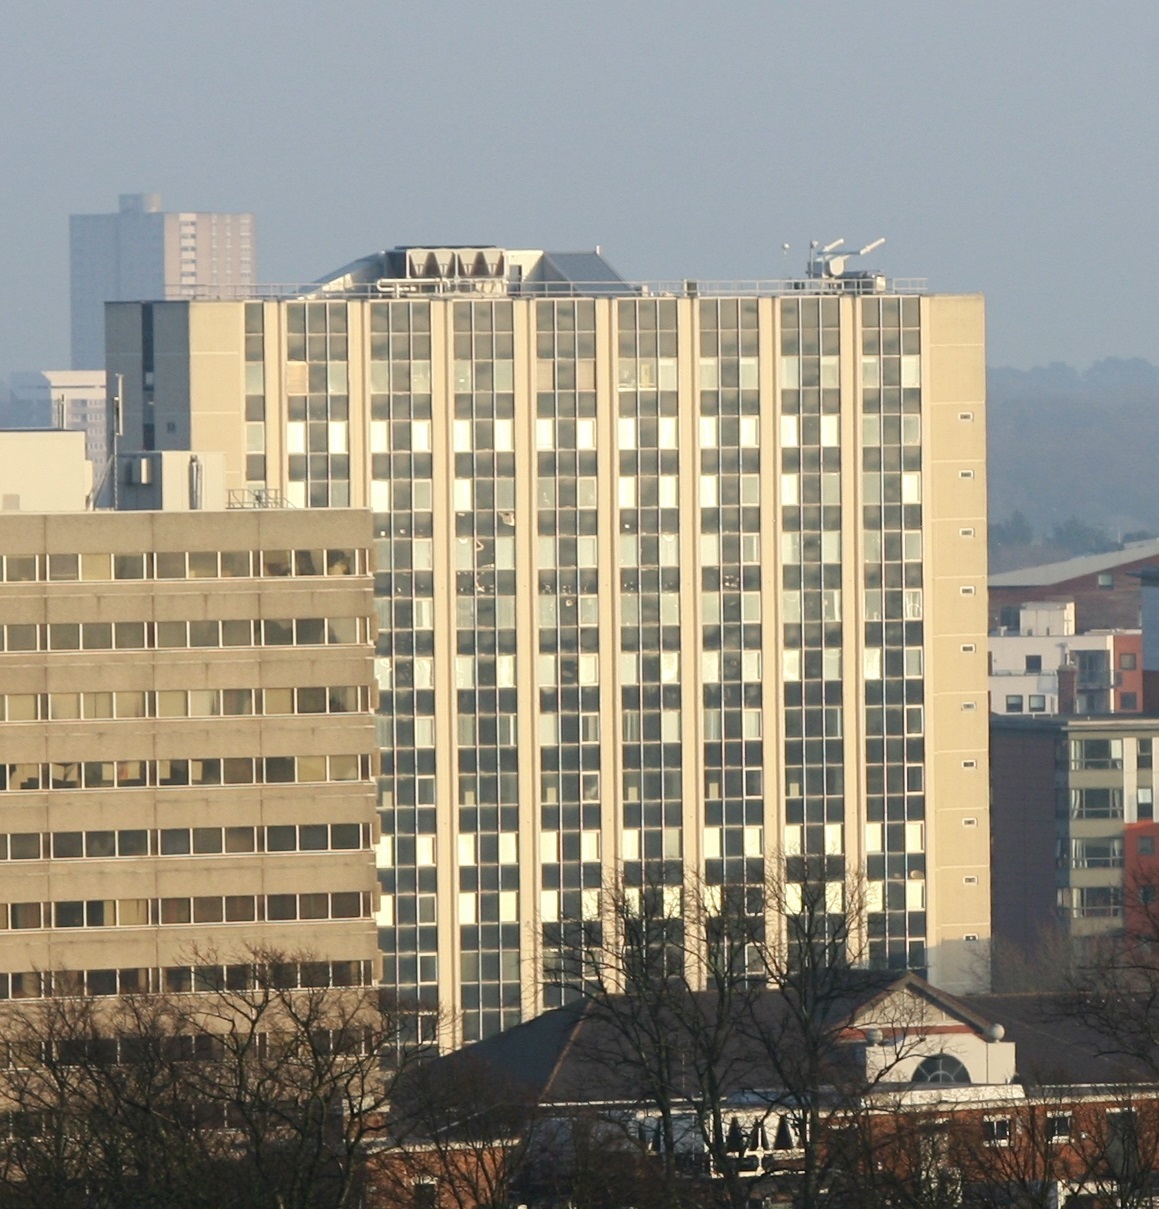 Dukes Keep and surrounds, view from Skandia building.